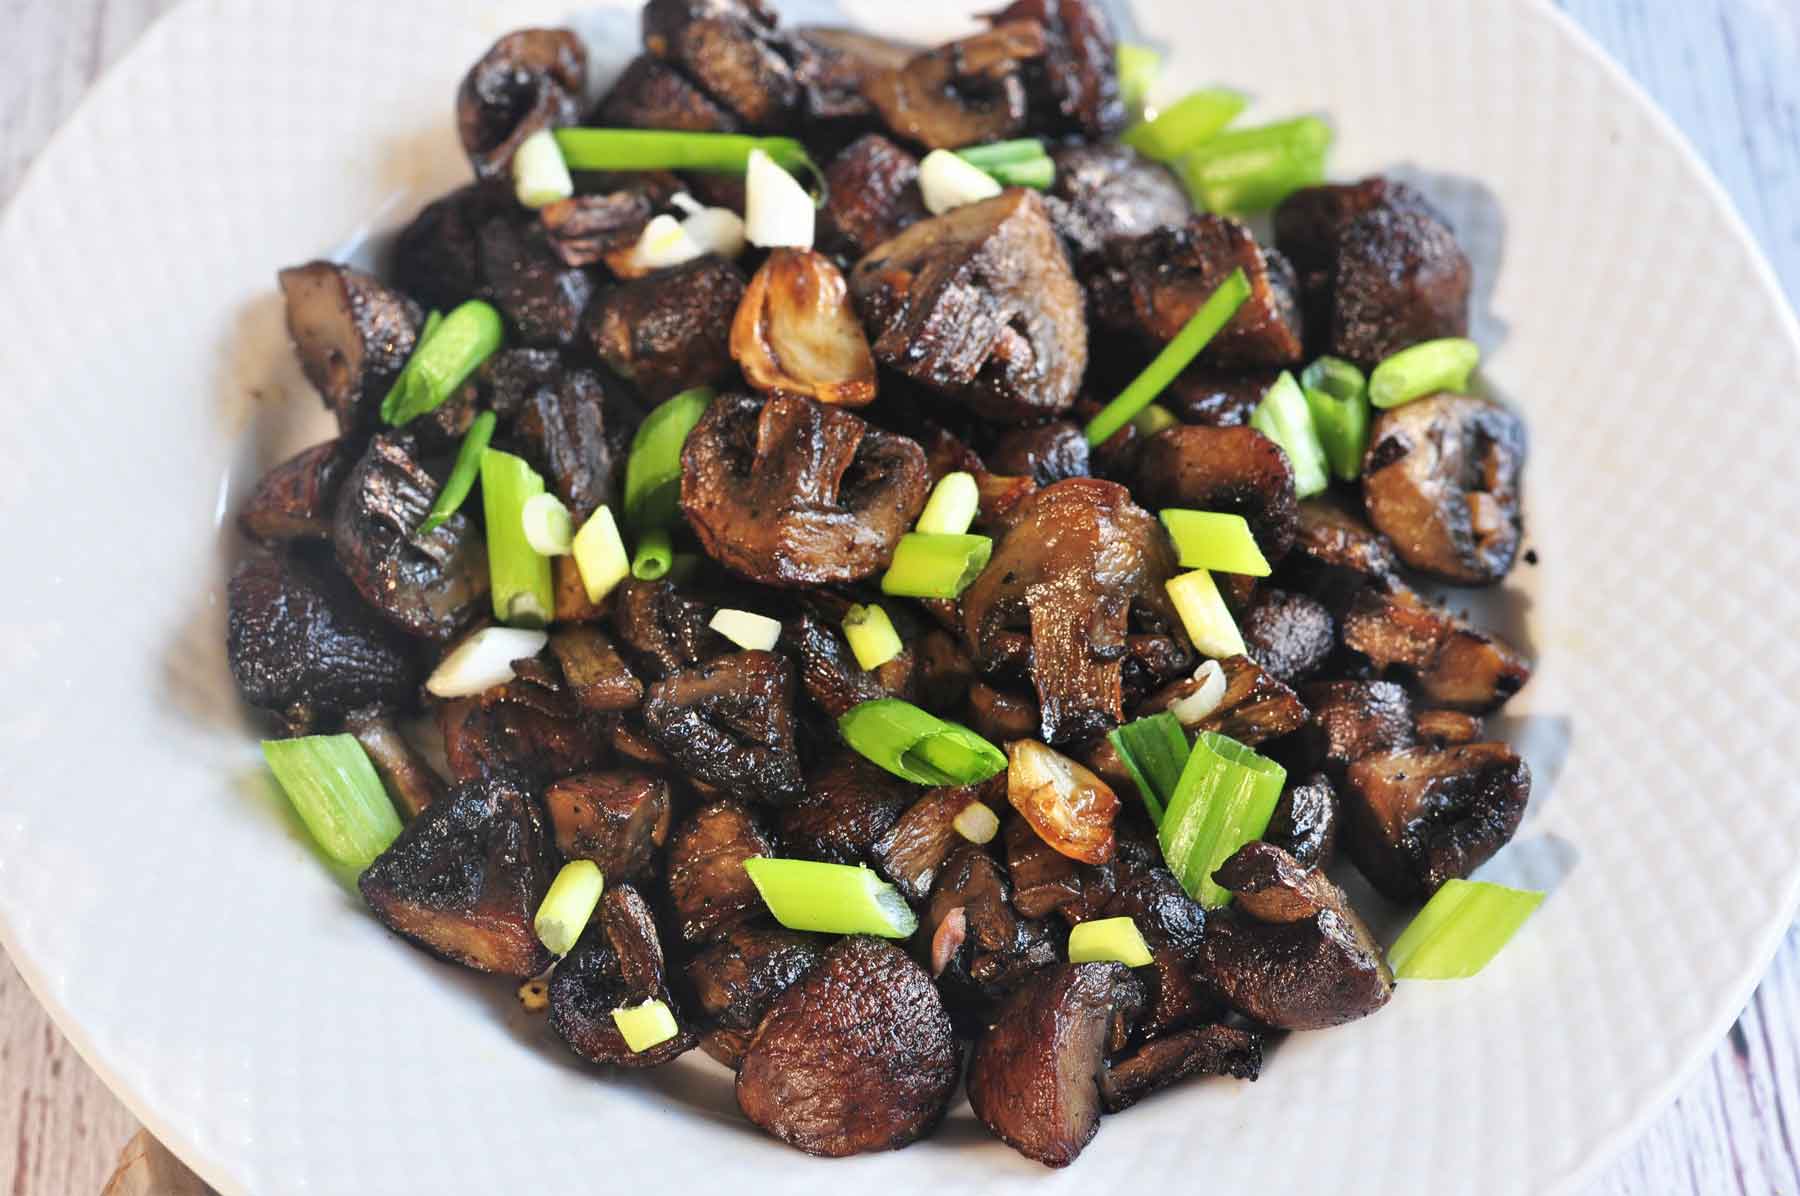 Airfryed mushroom served in a plate and garnished with green onion leaves.